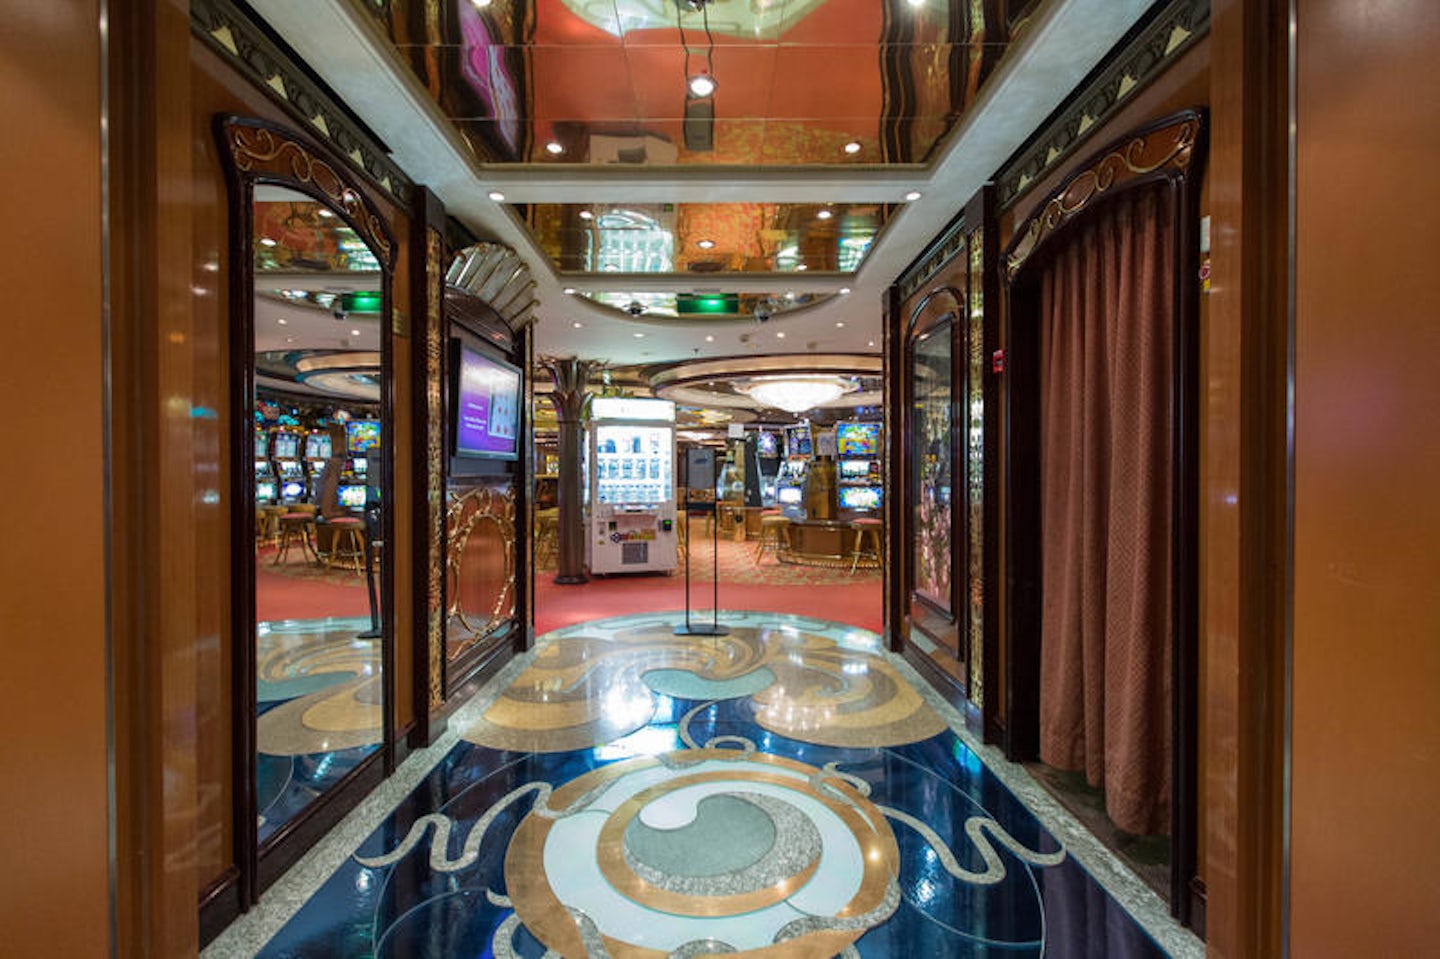 Casino Royale on Radiance of the Seas